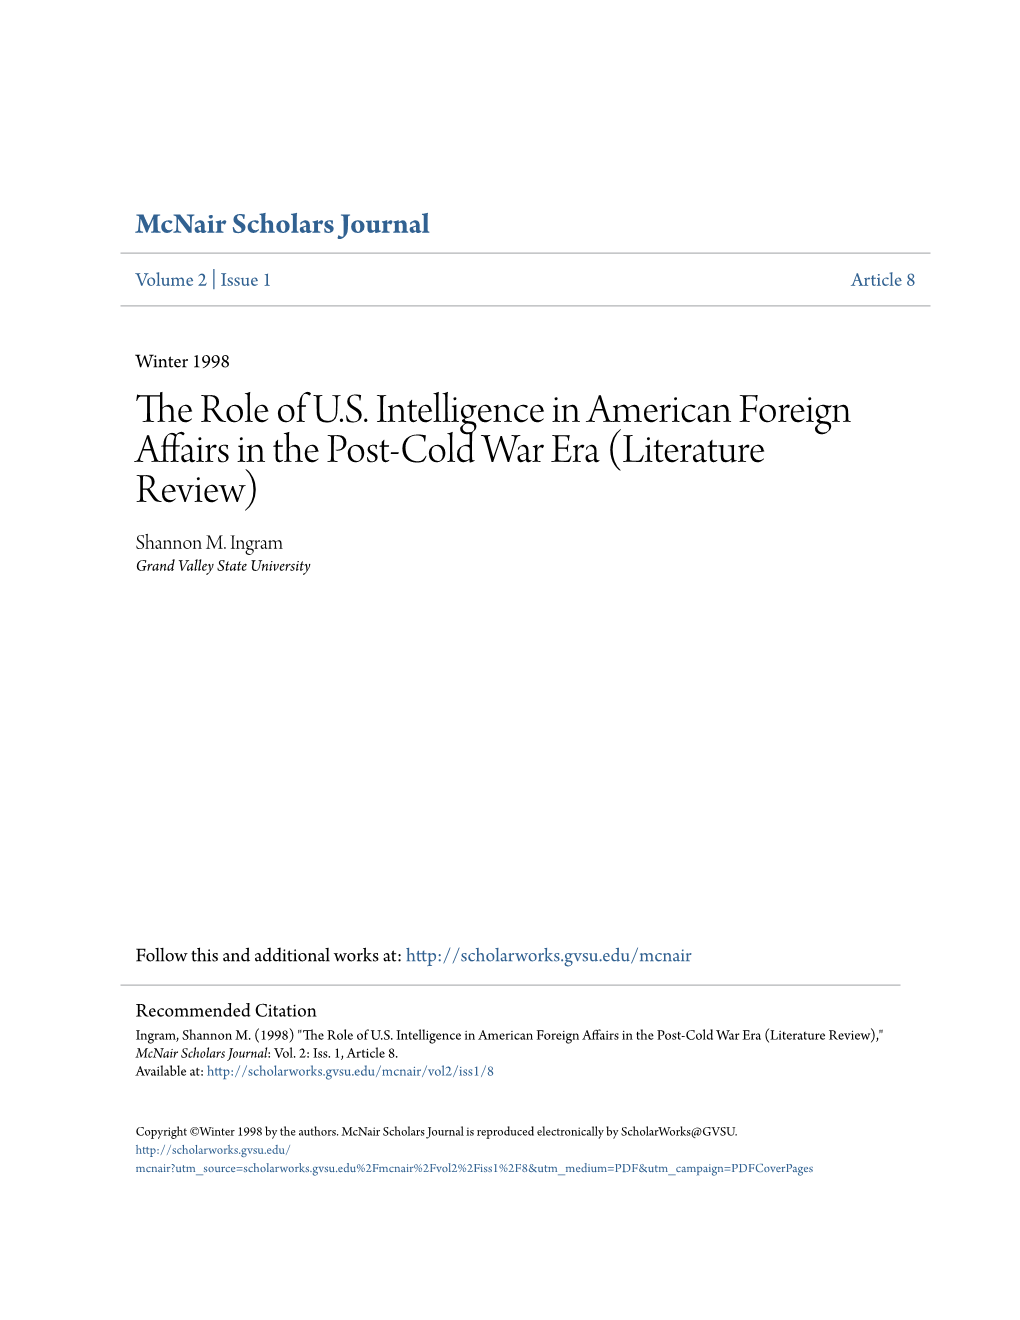 The Role of U.S. Intelligence in American Foreign Affairs in the Post-Cold War Era (Literature Review) Shannon M